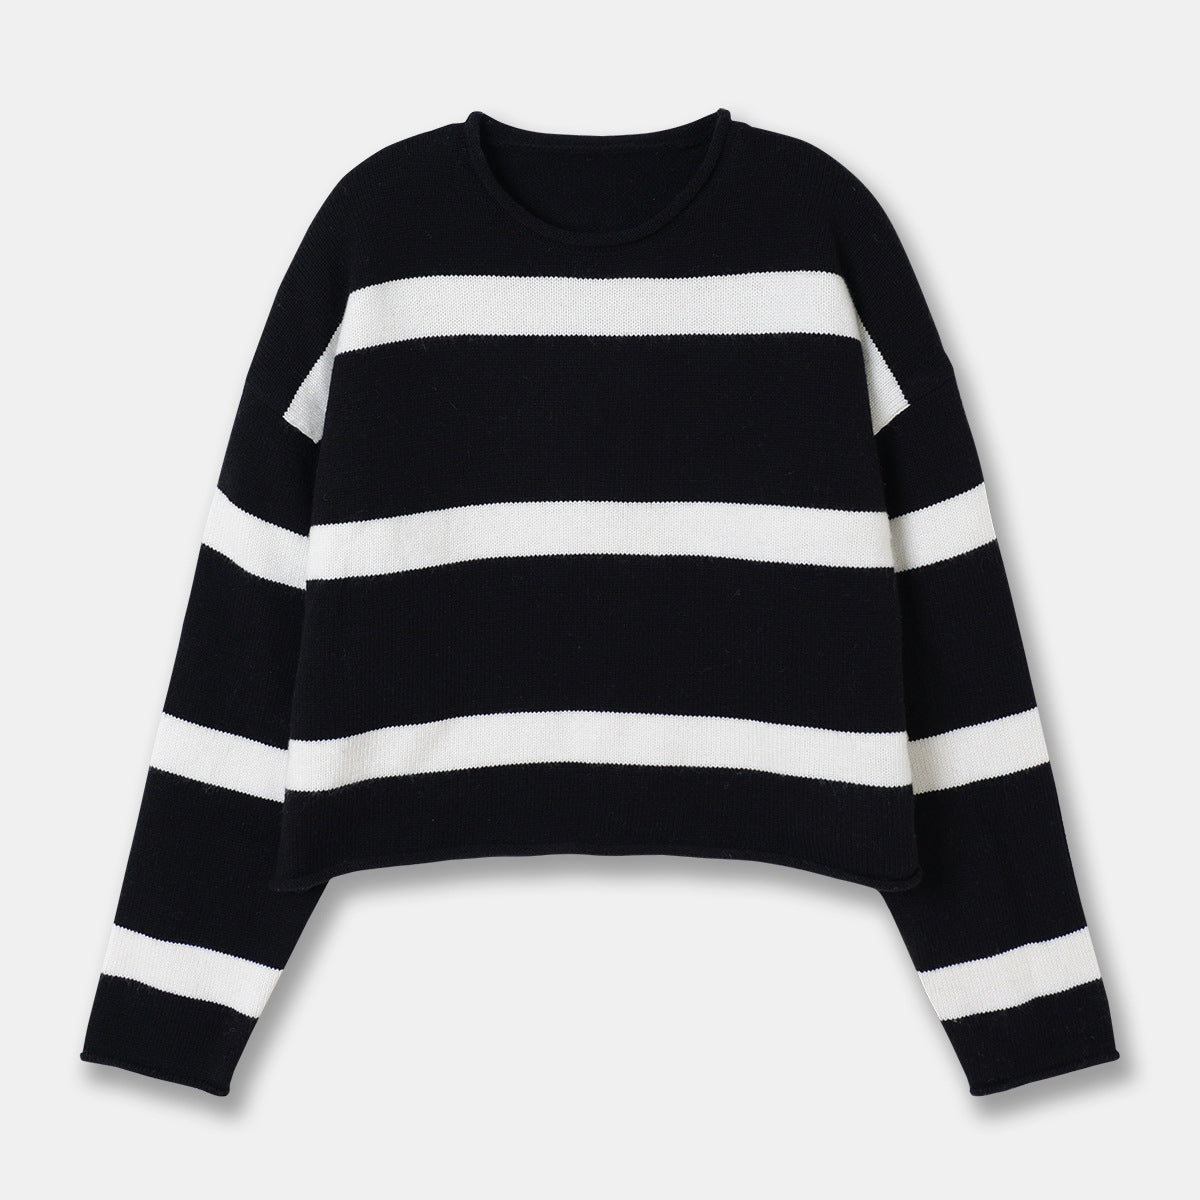 Wool Striped Sweater Curly Embroidered Striped Sweater Leisure Style Round Neck Casual Top Women